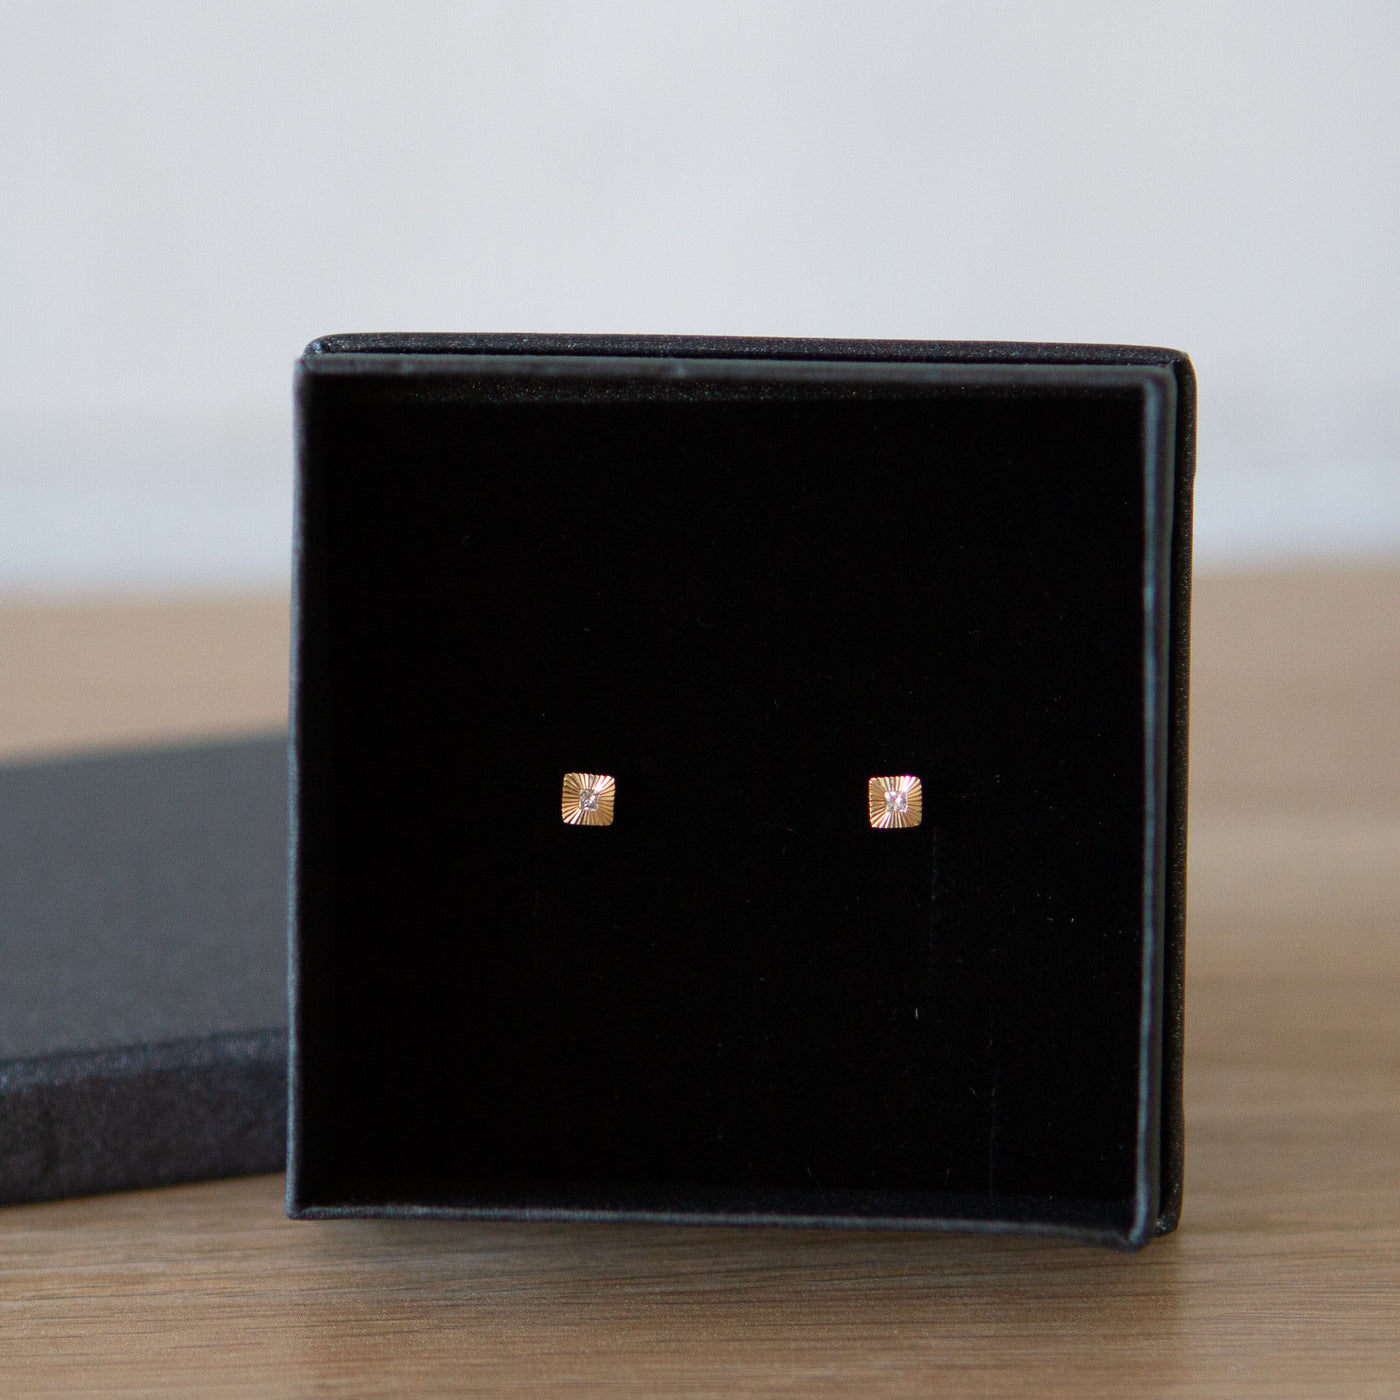 Square 14k yellow gold Aurora stud earrings with princess cut diamond centers and engraved rays in a gift box